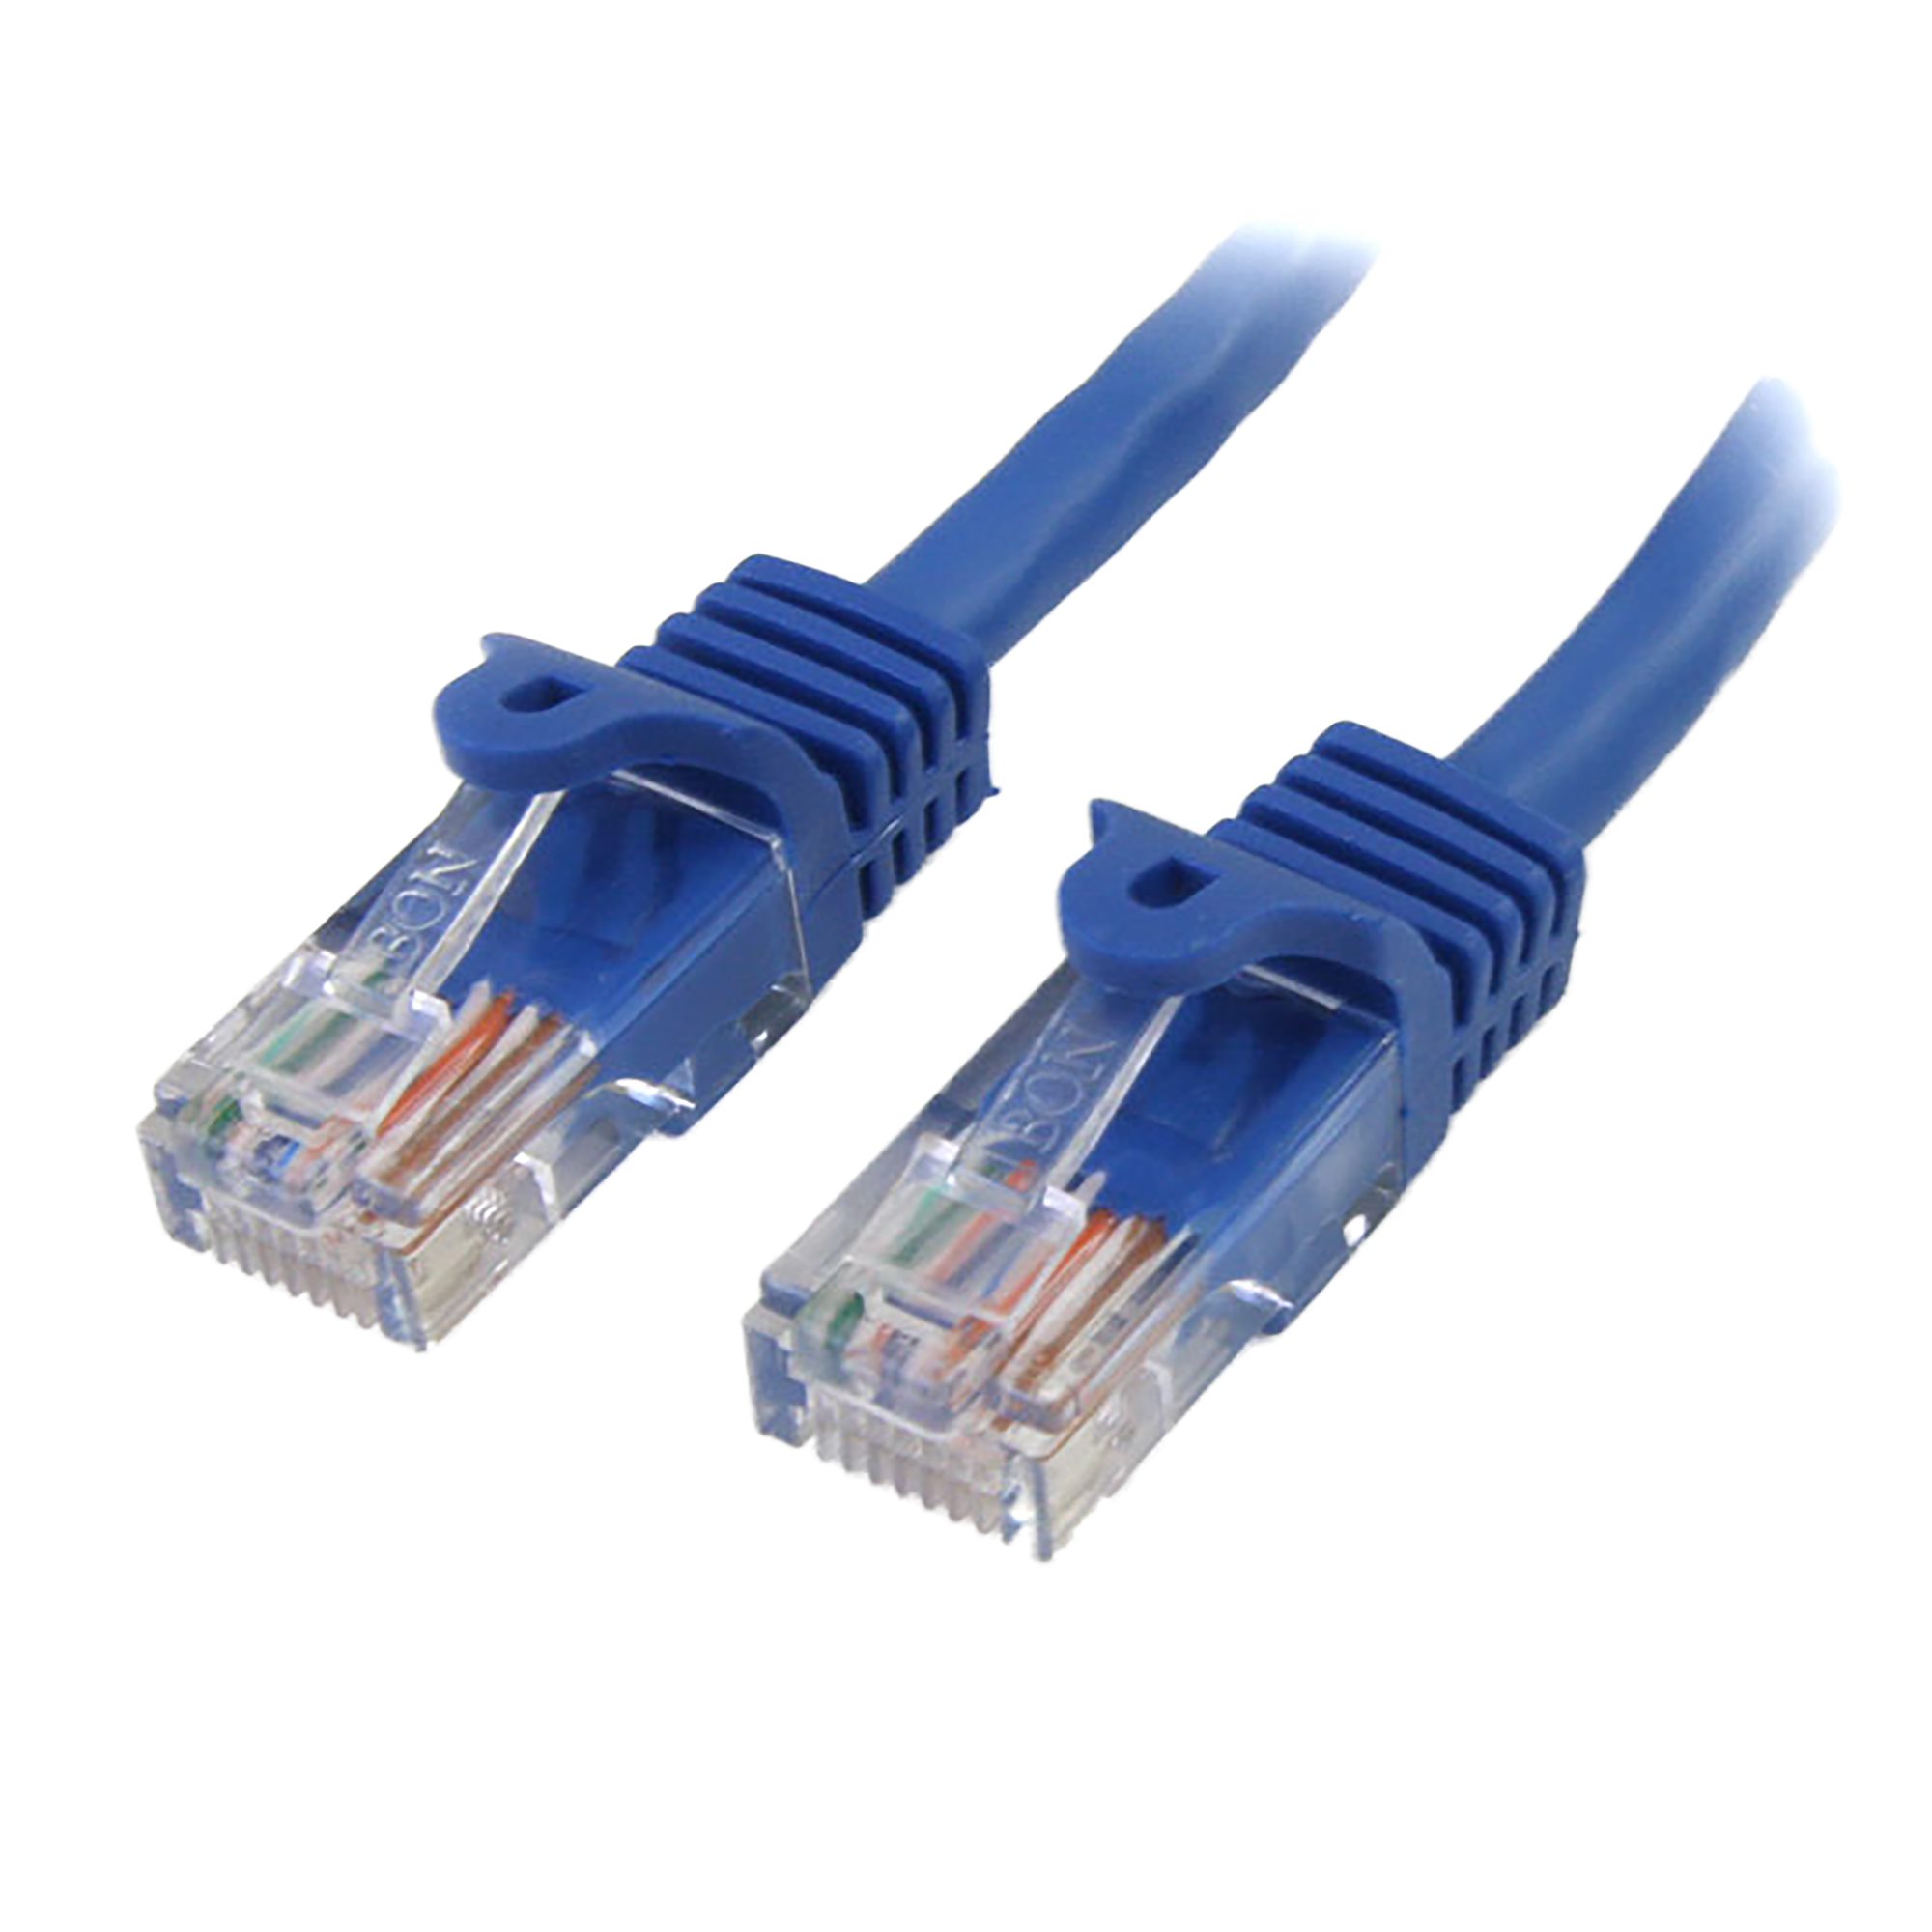 Ethernet Patch Cable Blue CNE50376 Cat5e 3 Feet 20 Pack Snagless/Molded Boot 